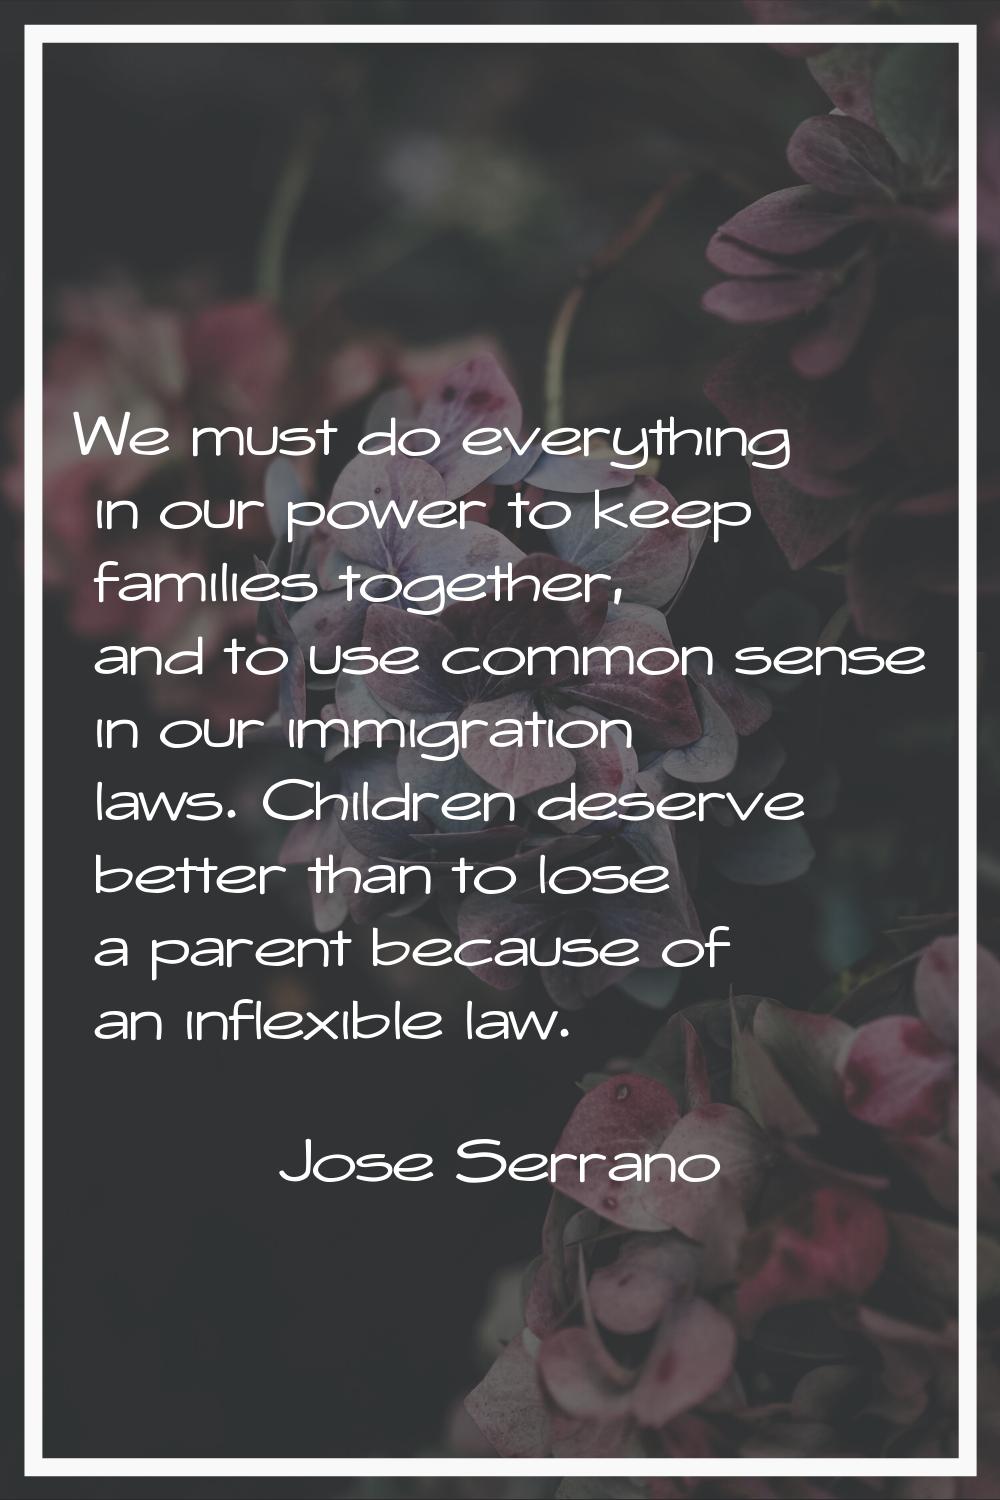 We must do everything in our power to keep families together, and to use common sense in our immigr